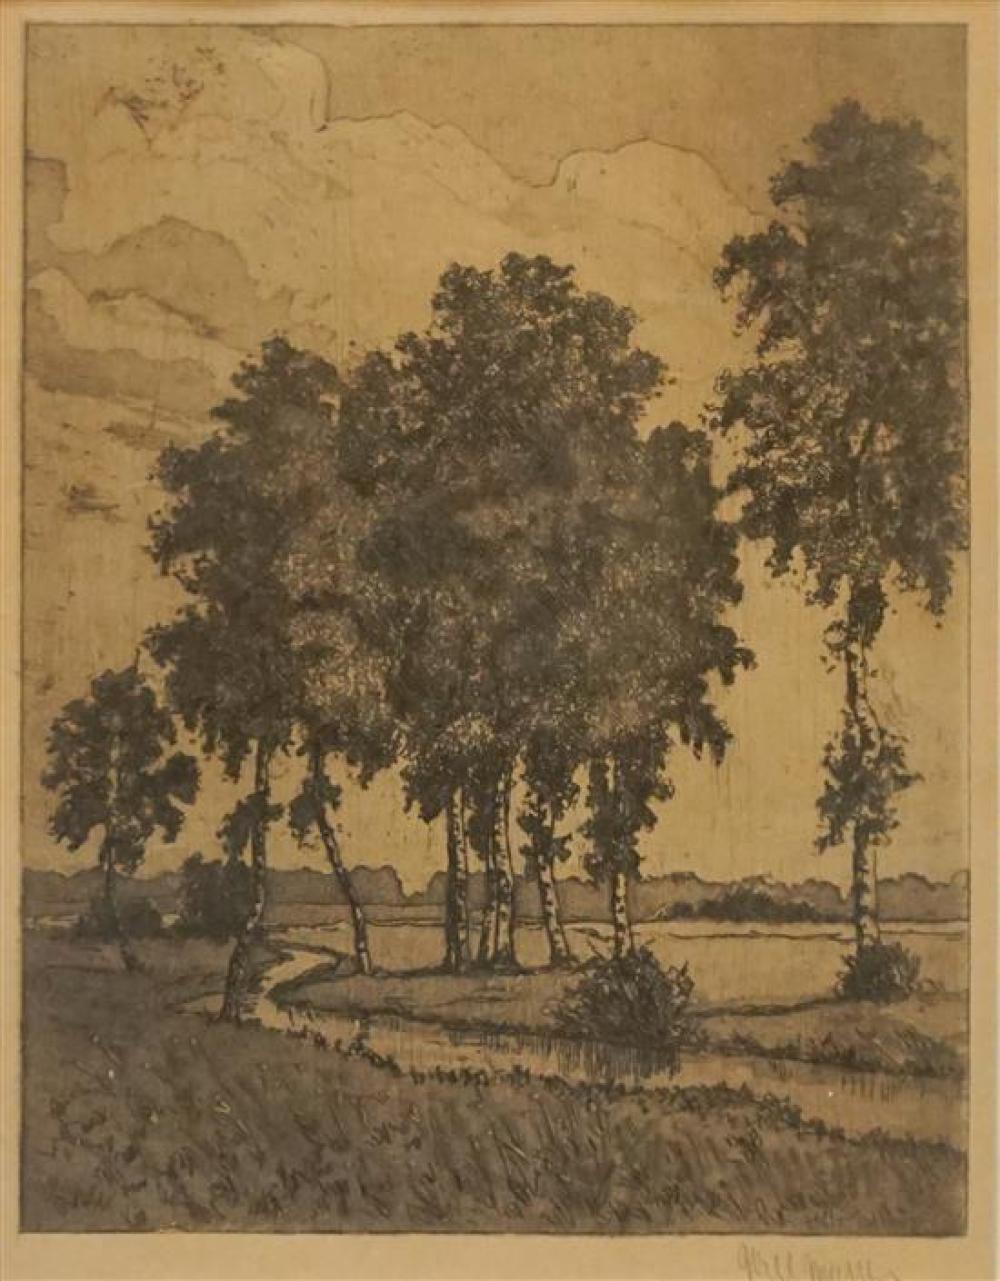 W. MATHES, TREES AND CREEK, ETCHING,